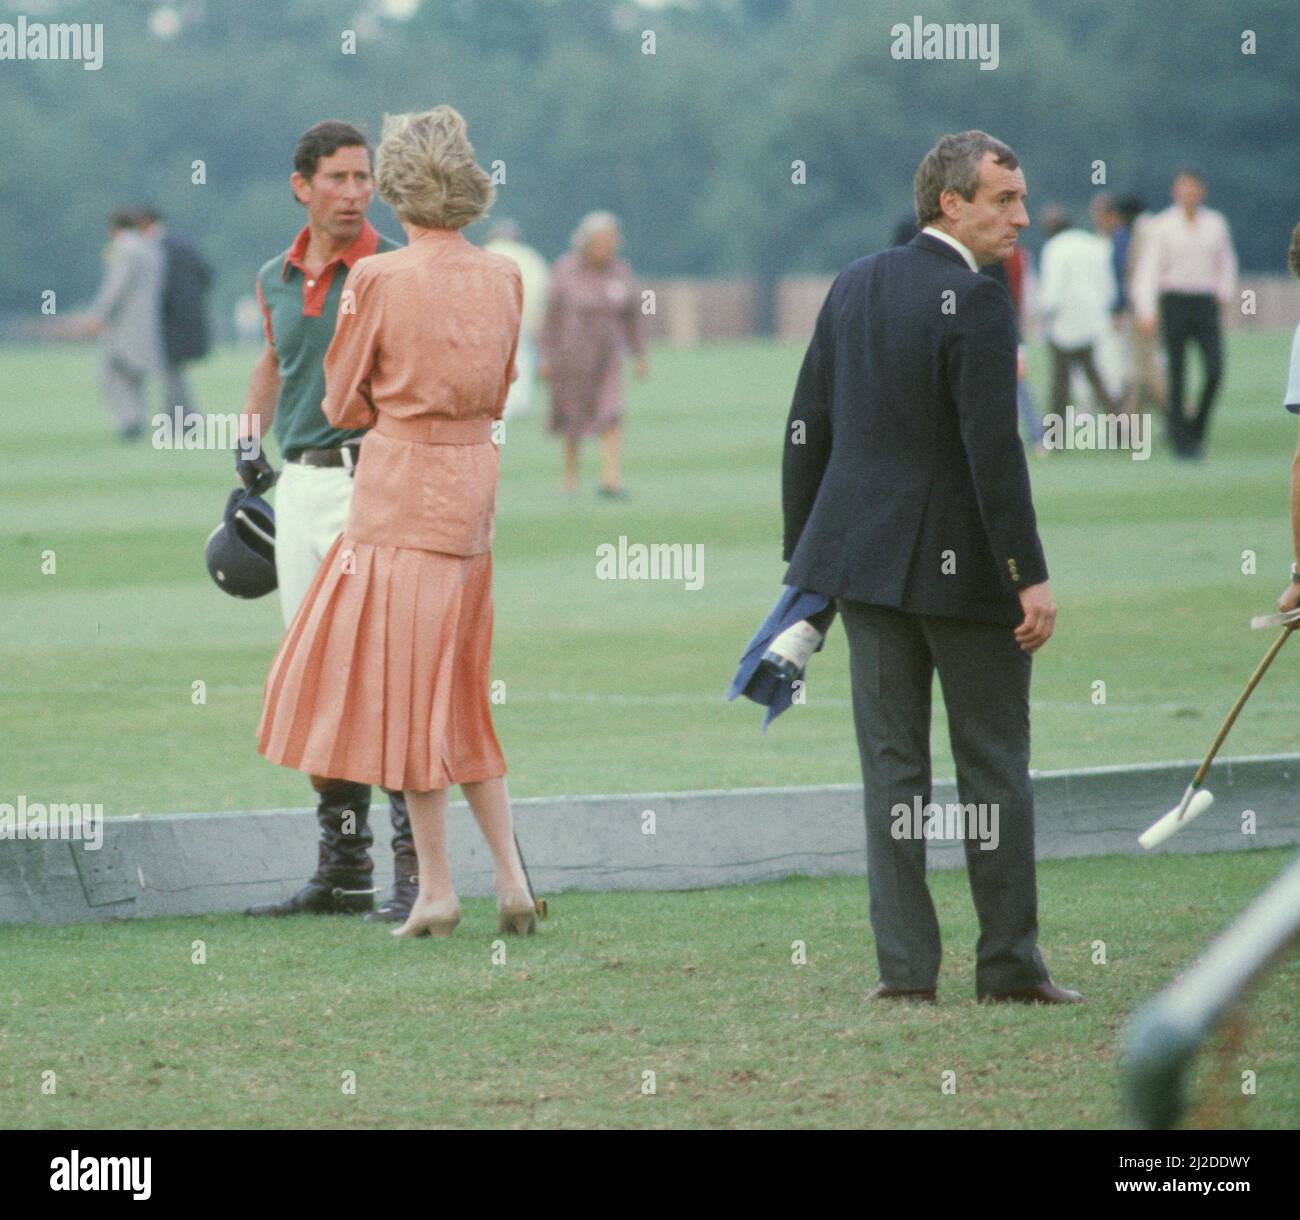 HRH Princess Diana, The Princess of Wales, and HRH Prince Charles, The Prince of Wales, at Guards Polo at Windsor, Berkshire. Sanding to the behind right of the Princess, is her bodyguard Barry Mannakee, wearing the dark suit and holding a bottle of drink  Picture taken 20th June 1985 Stock Photo